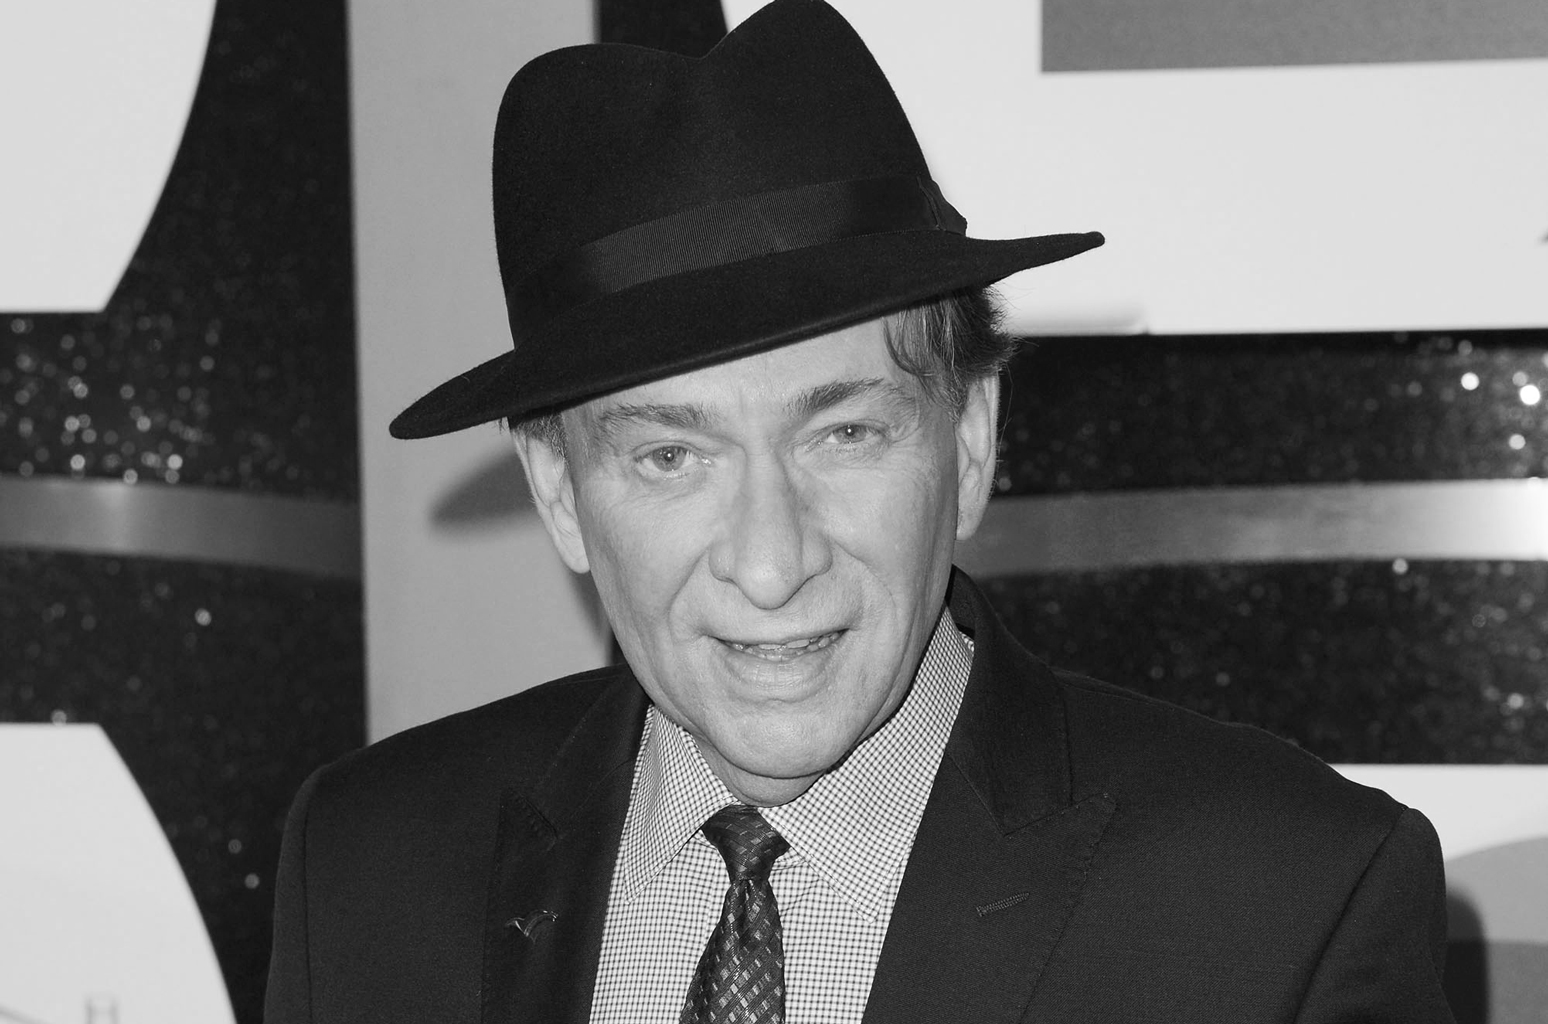 Bobby Caldwell Dies at 71; ‘What You Won’t Do For Love’ Singer Dead